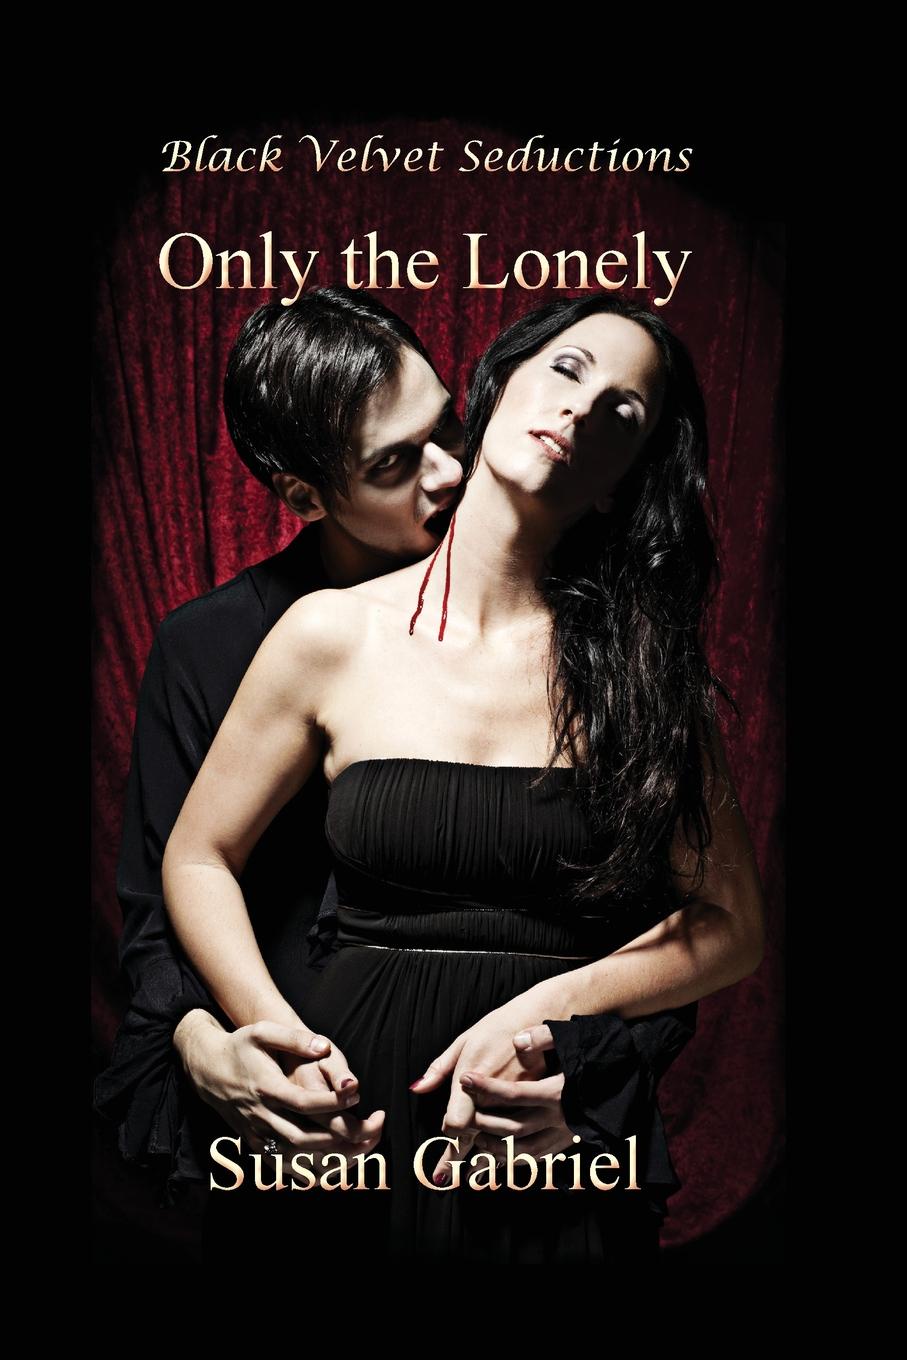 Only novel. Lonely only.